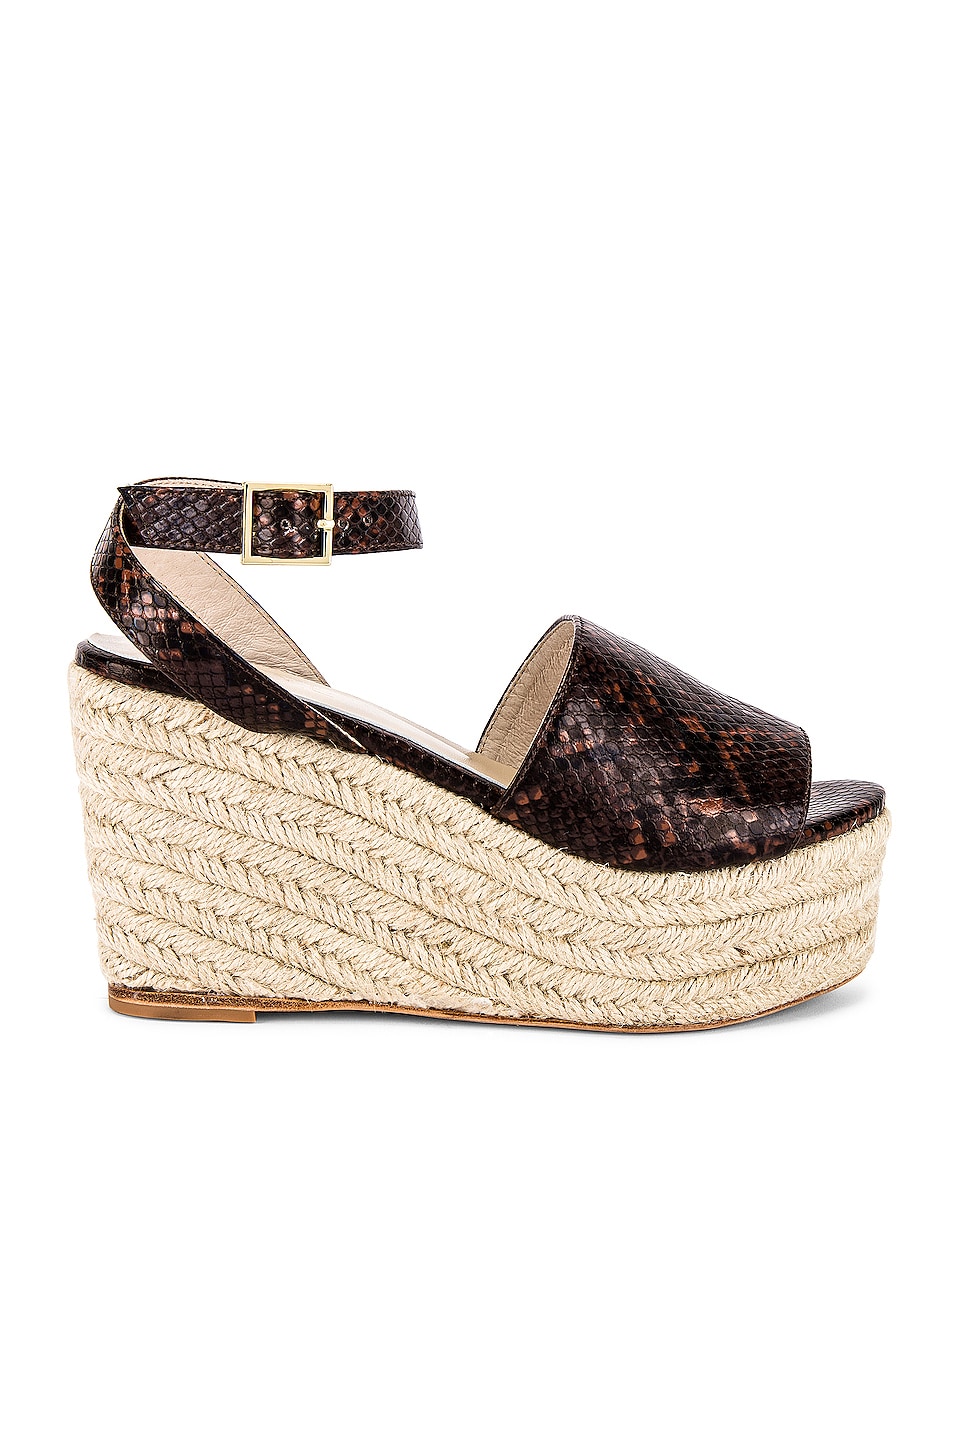 RAYE Griffith Wedge in Brown | REVOLVE